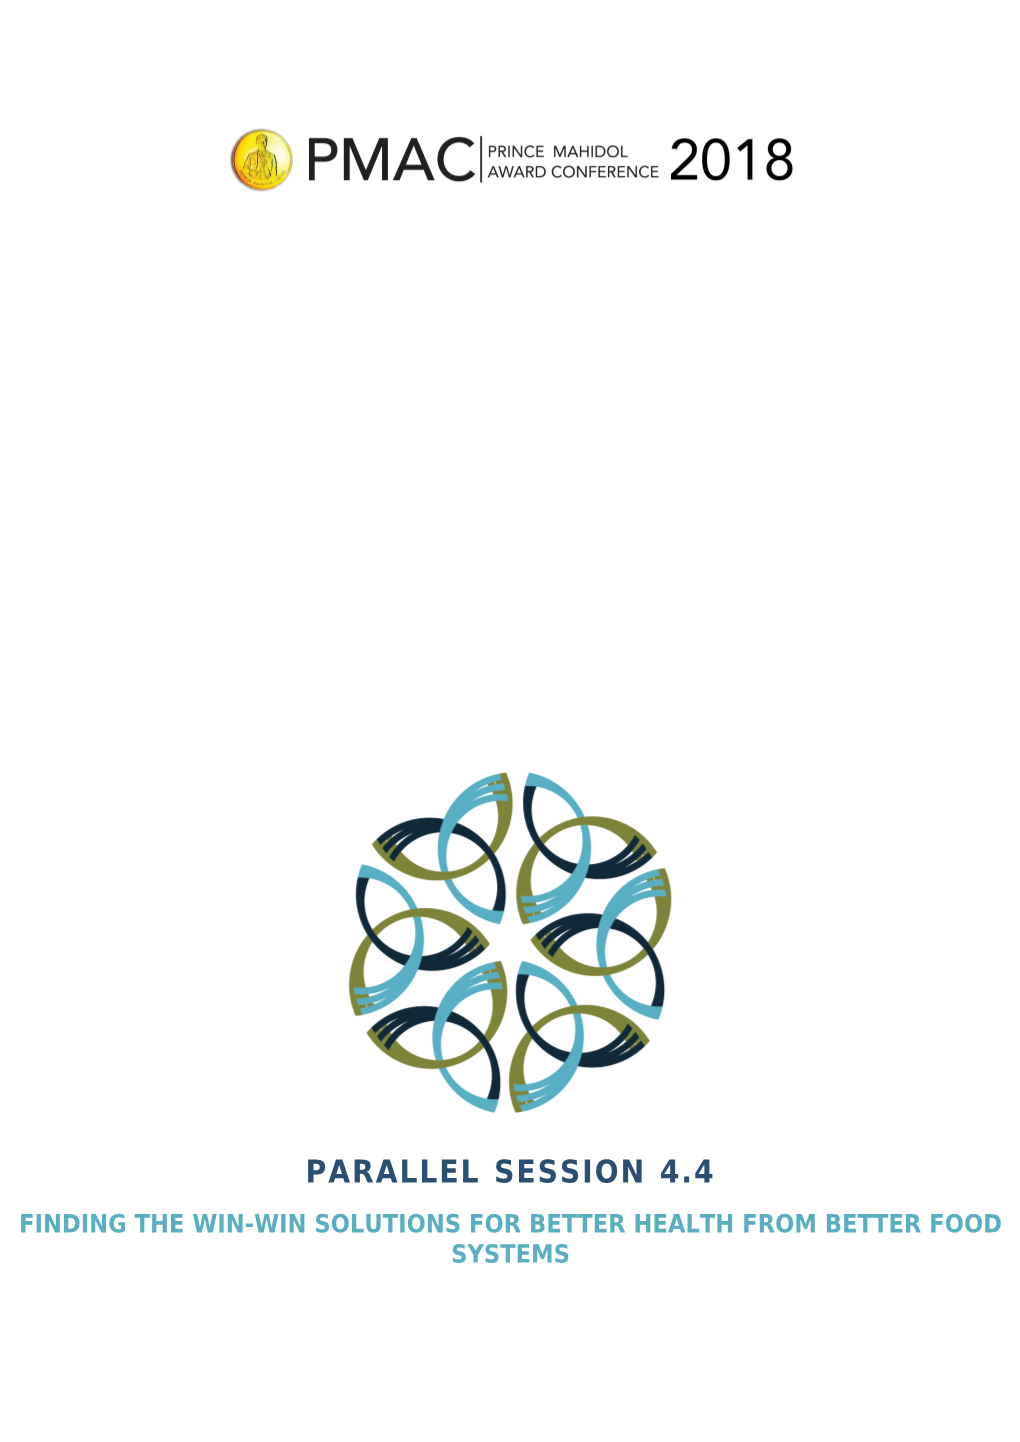 Parallel Session 4.4 Finding the Win-Win Solutions for Better Health from Better Food Systems | Background